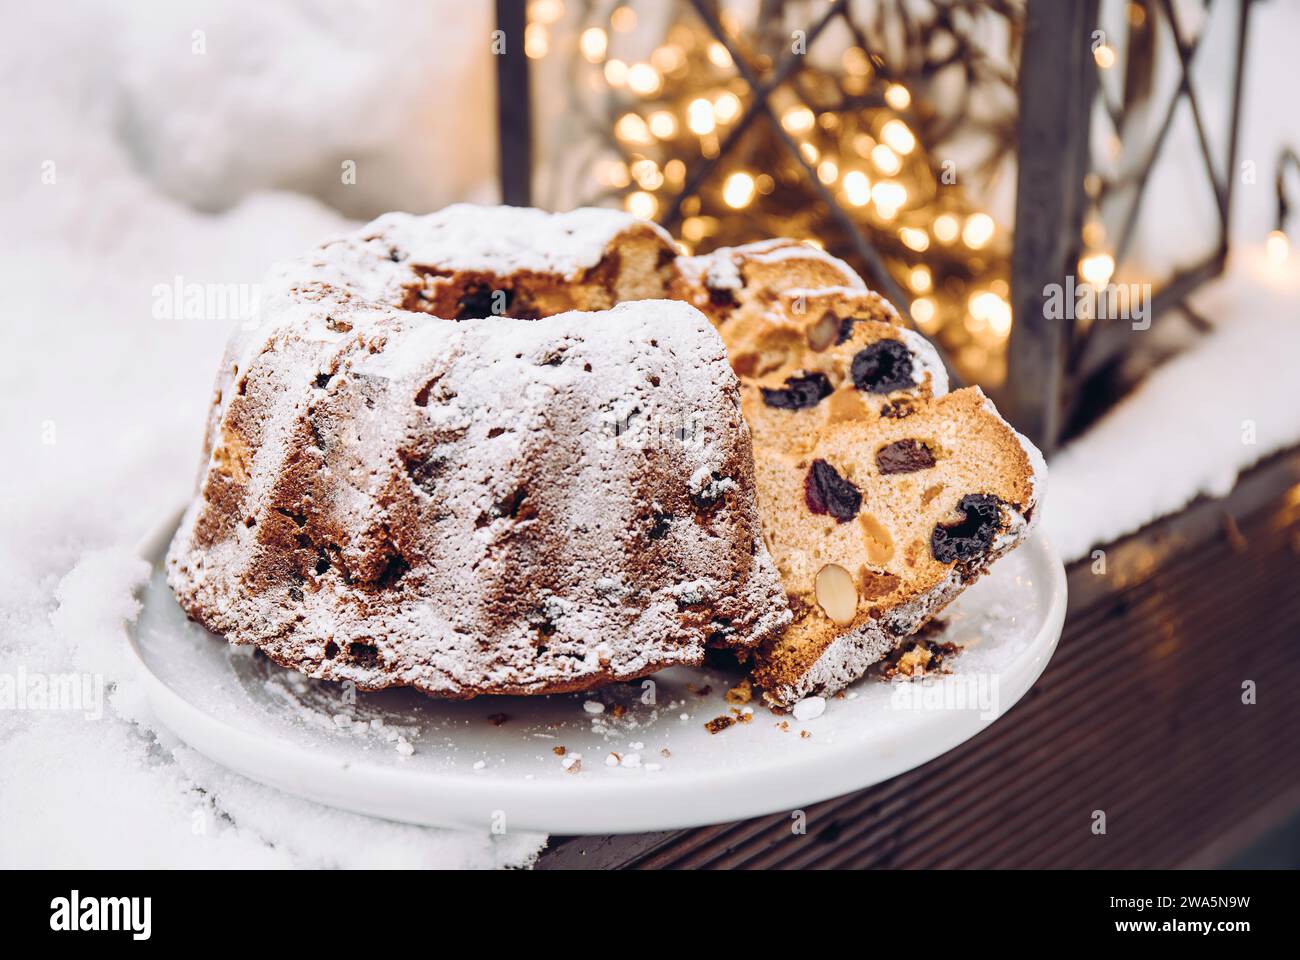 Traditional Christmas pound cake or fruitcake with dried fruits on plate with pieces cut out, snow and Christmas lights on background. Stock Photo